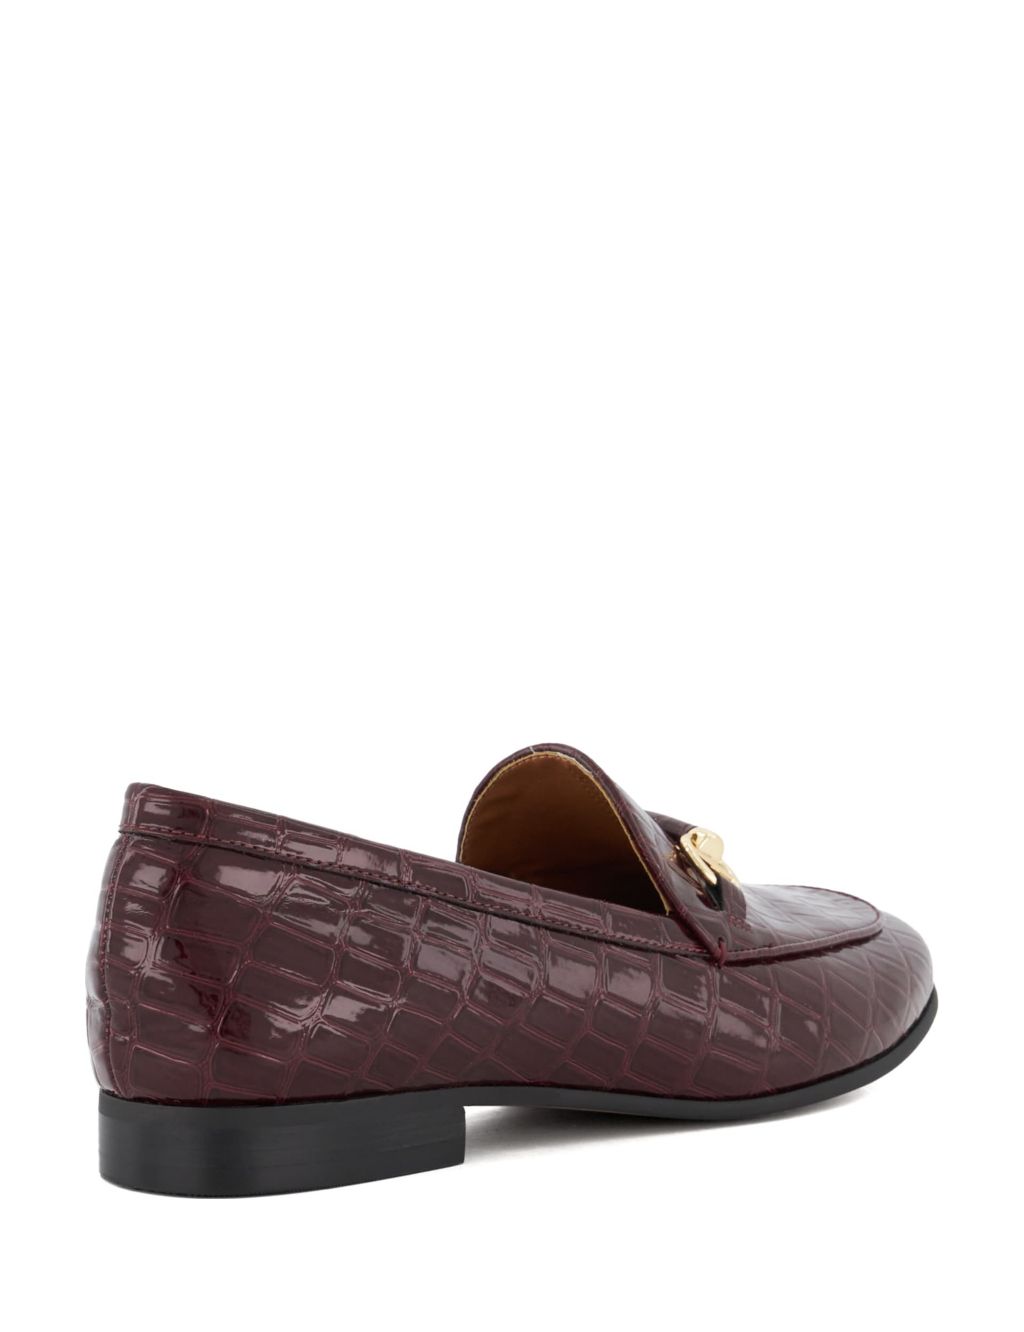 Leather Bar Trim Flat Loafers image 4